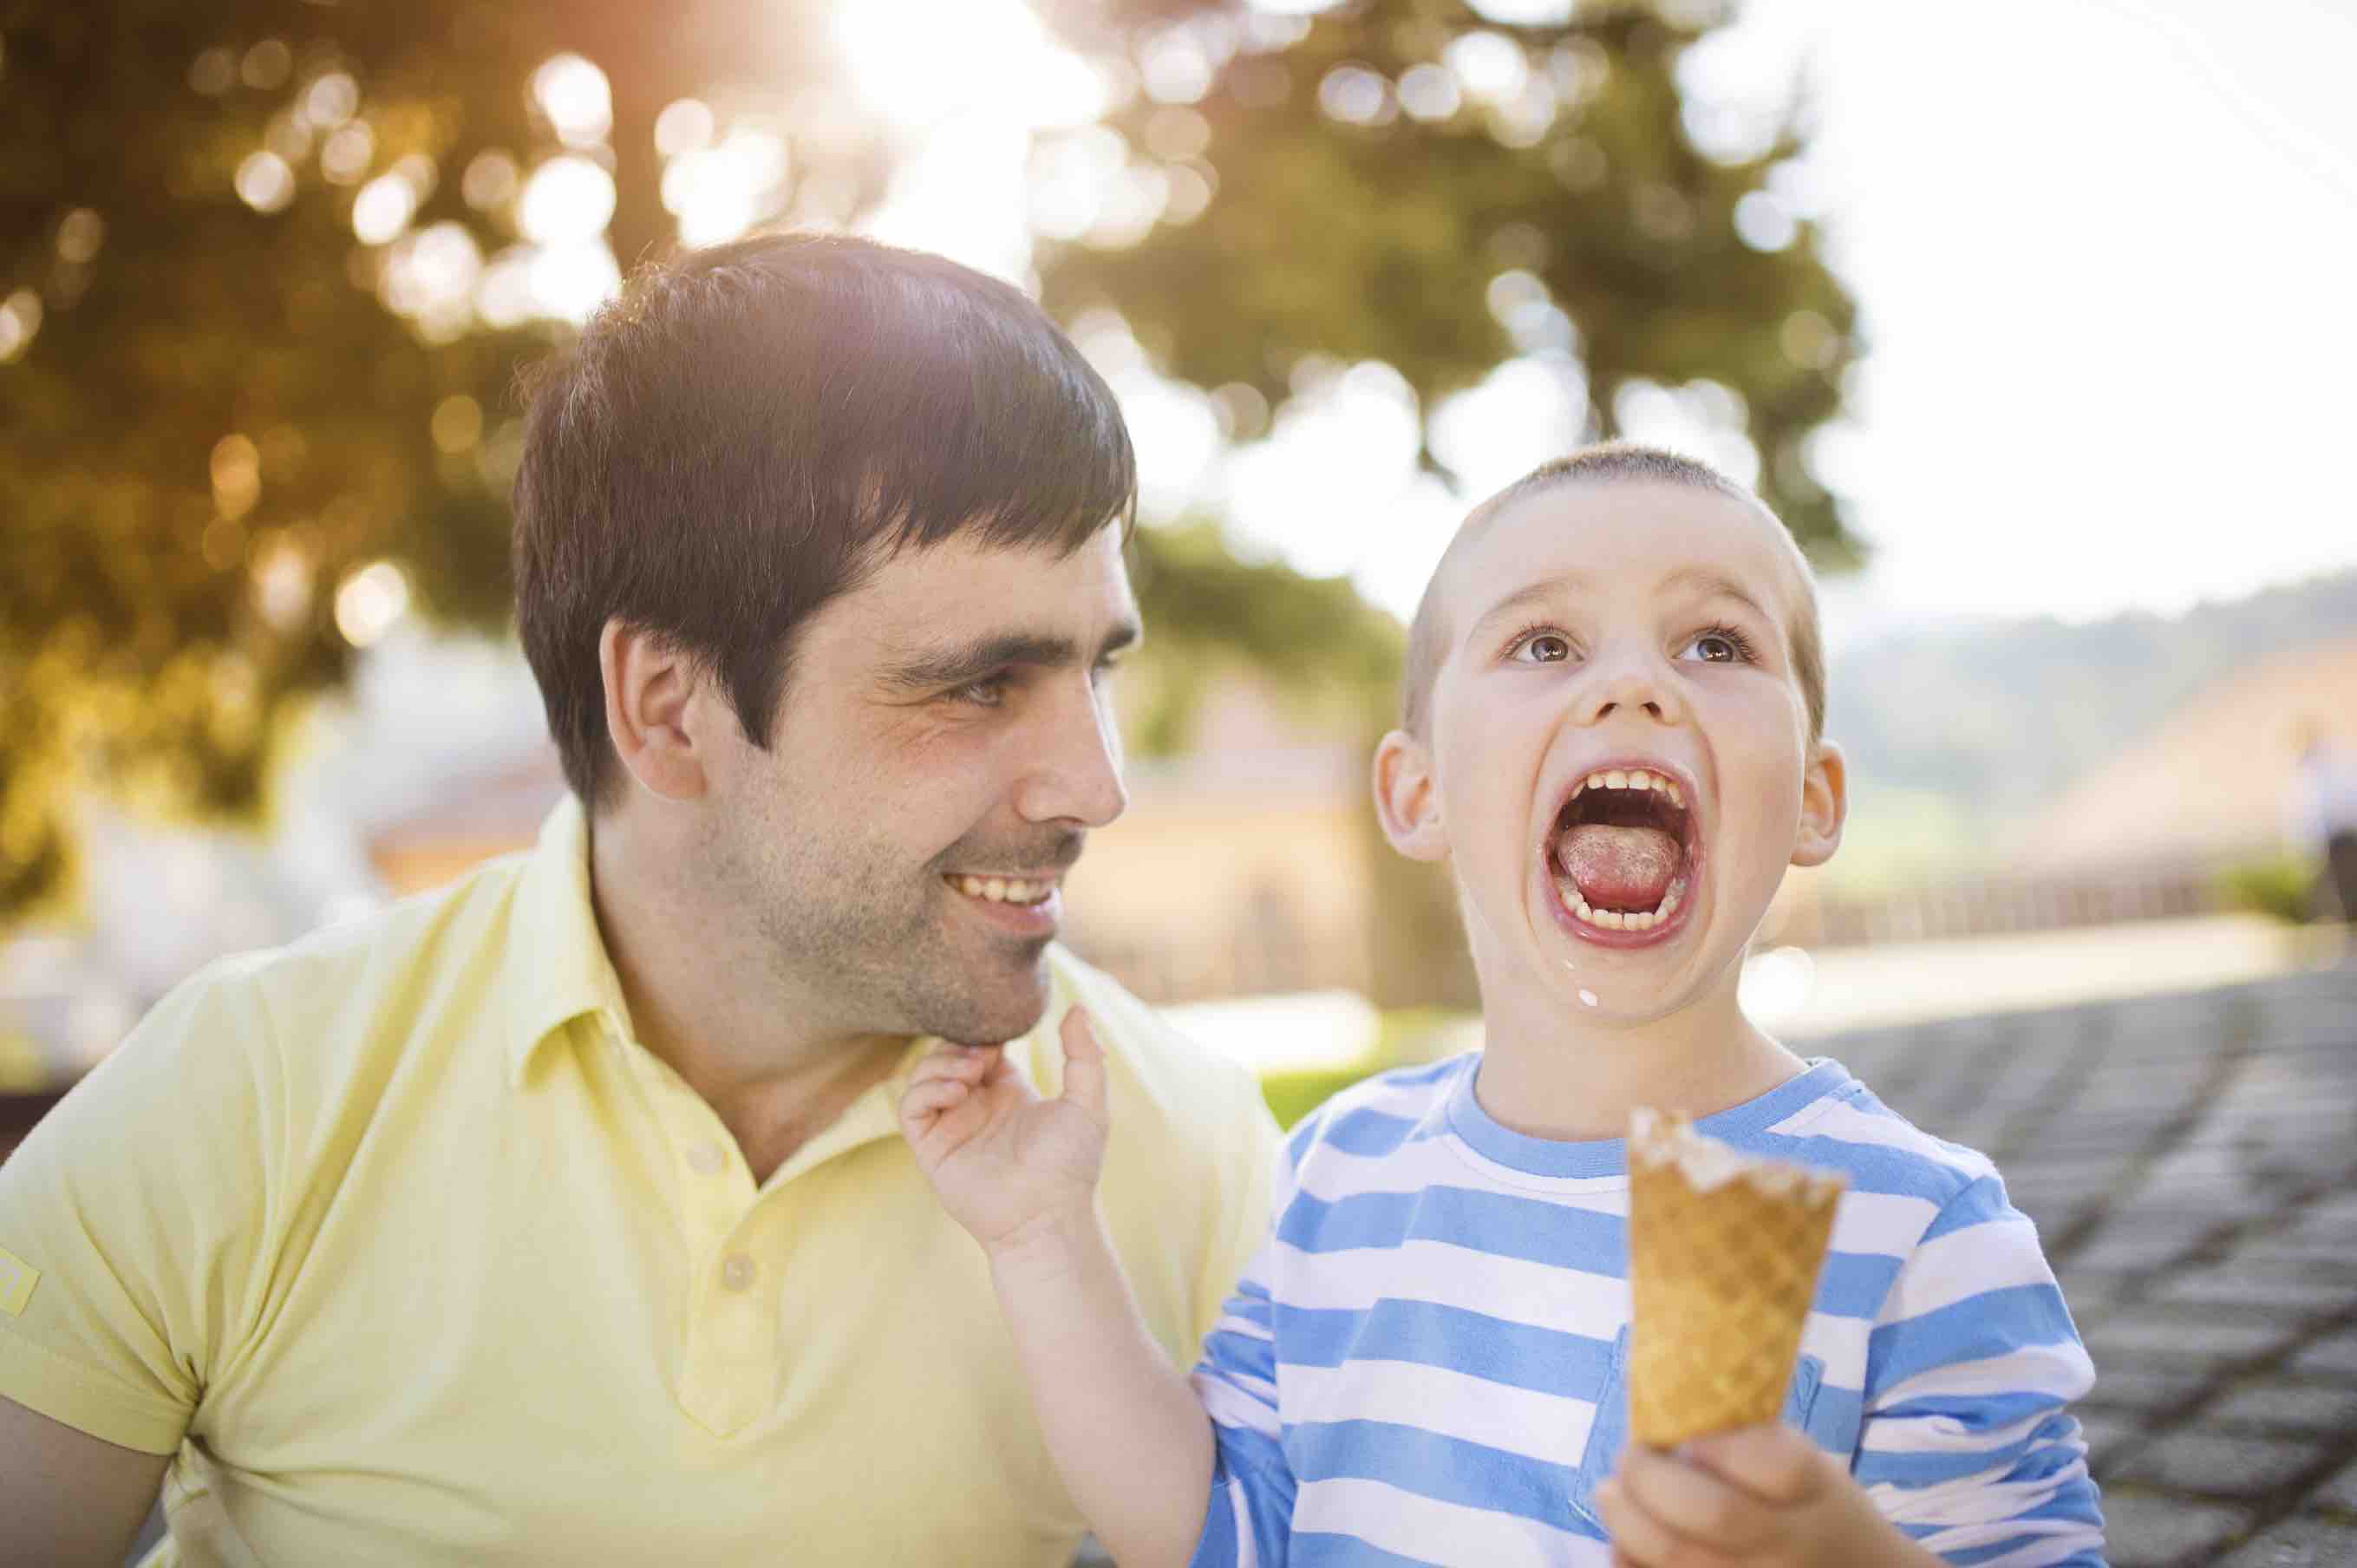 Ice cream is America’s favorite dessert! Your teeth might not be fond of all the sugar, but you don’t have to skip this summer treat: